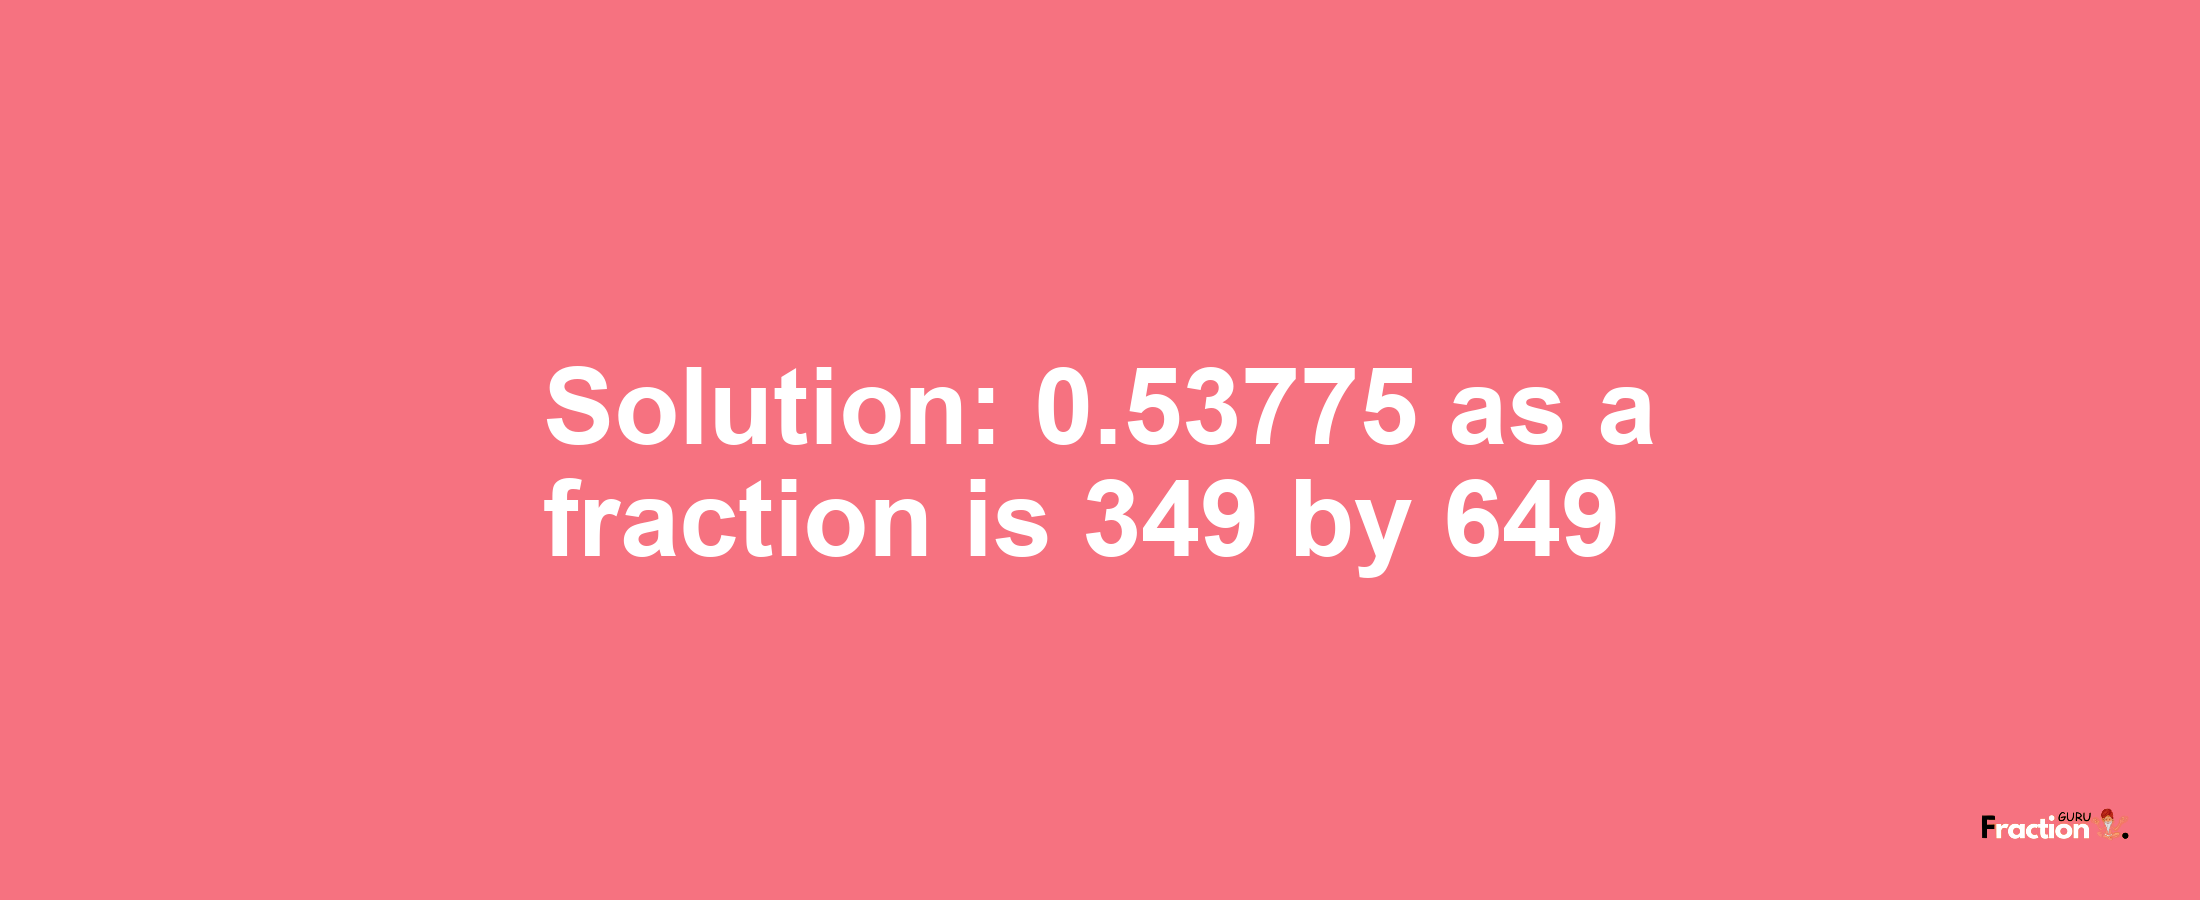 Solution:0.53775 as a fraction is 349/649